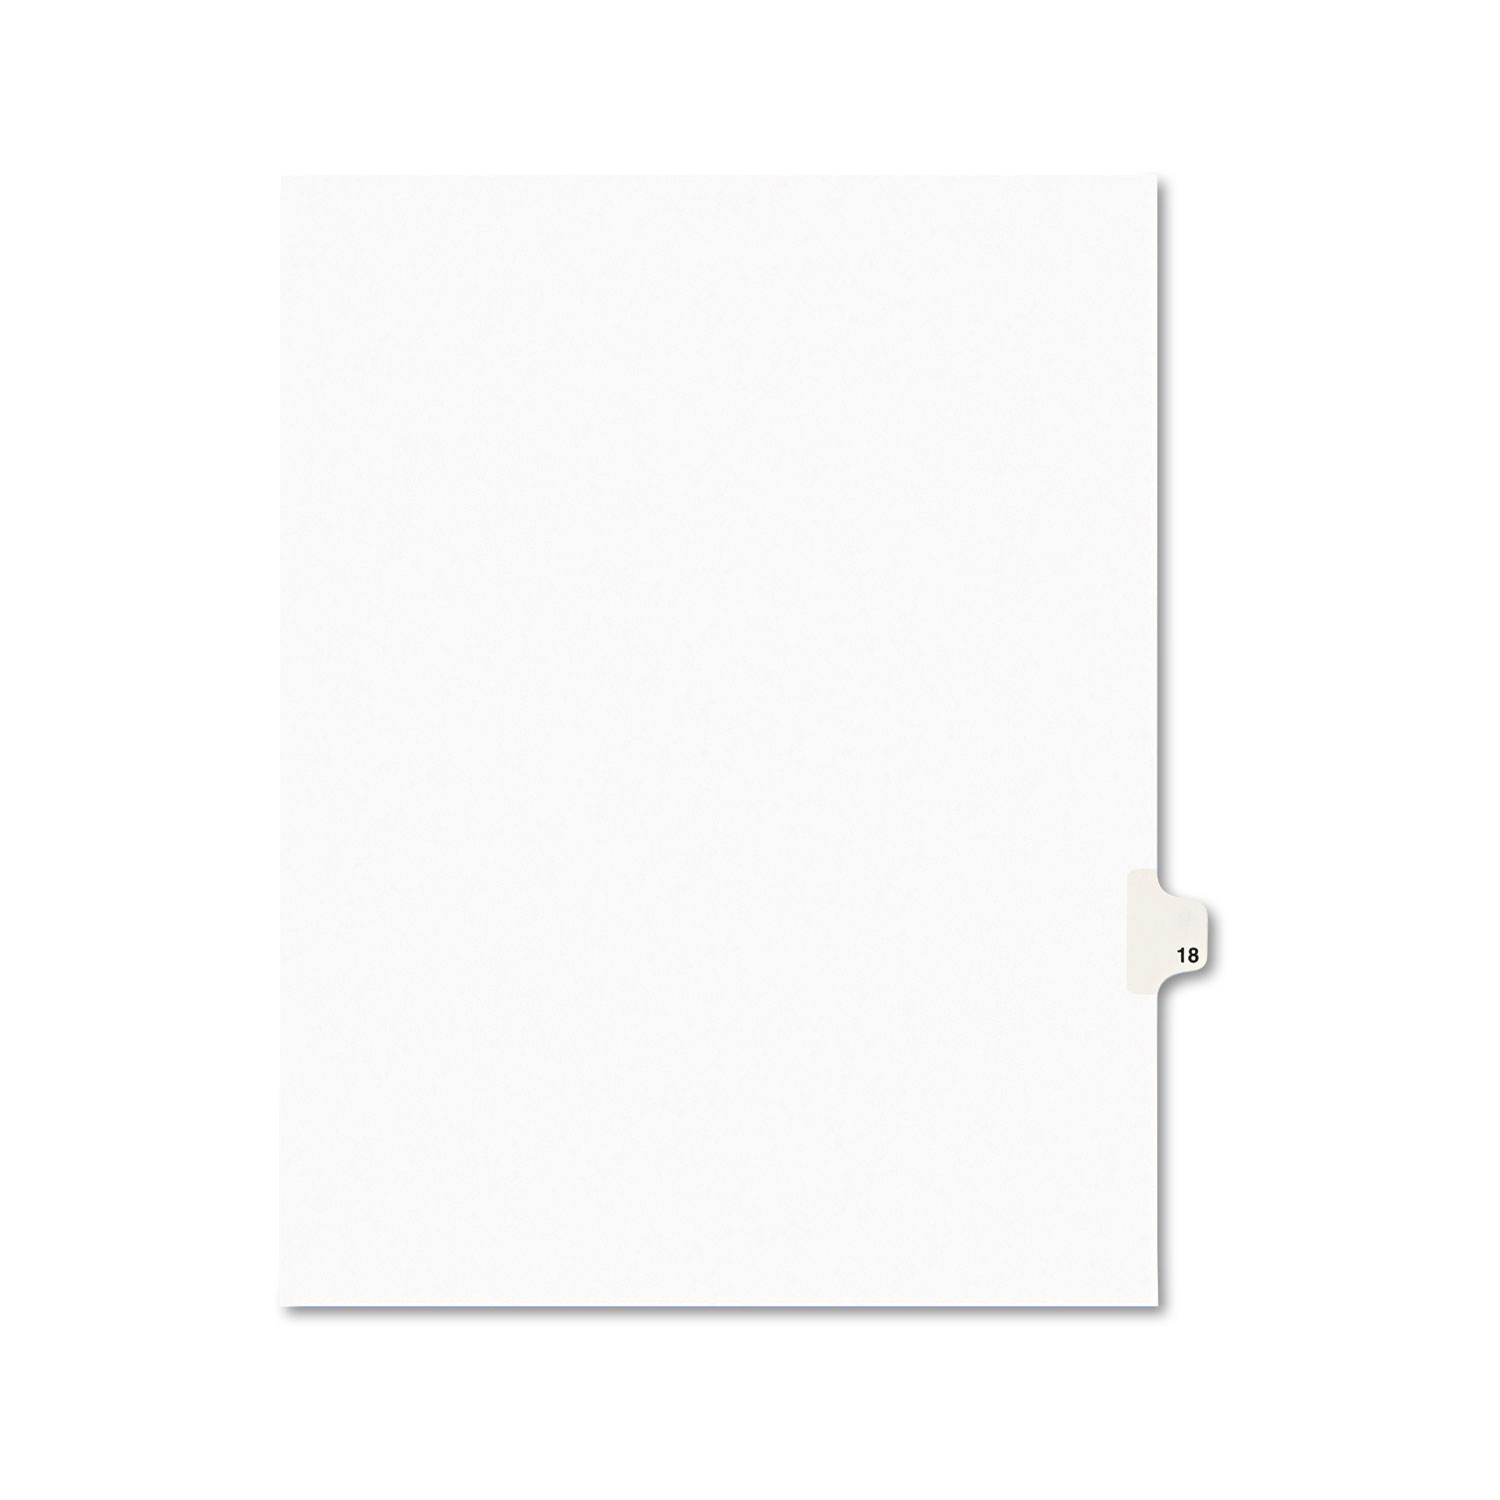  Avery 01018 Preprinted Legal Exhibit Side Tab Index Dividers, Avery Style, 10-Tab, 18, 11 x 8.5, White, 25/Pack (AVE01018) 